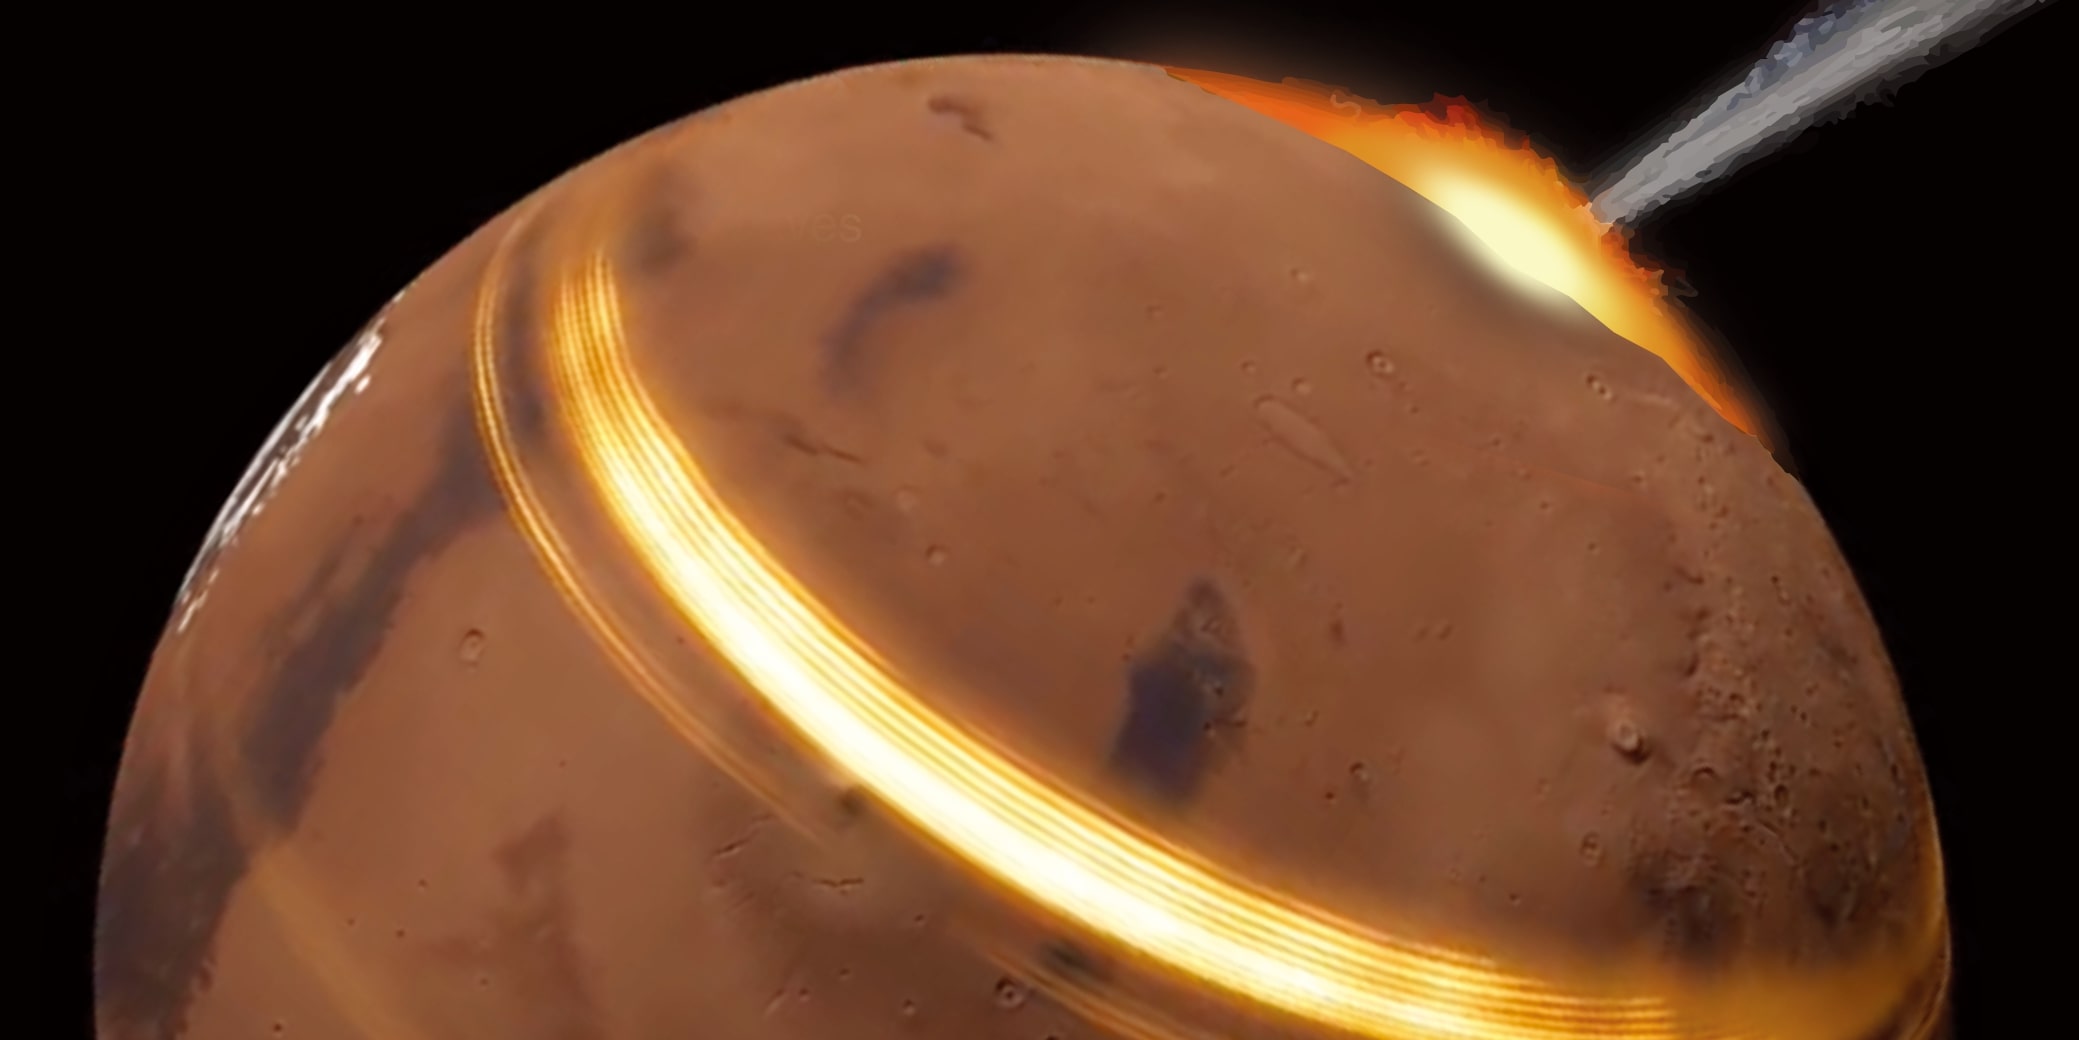 Enormous meteor strike blows 500 foot-wide crater into Mars